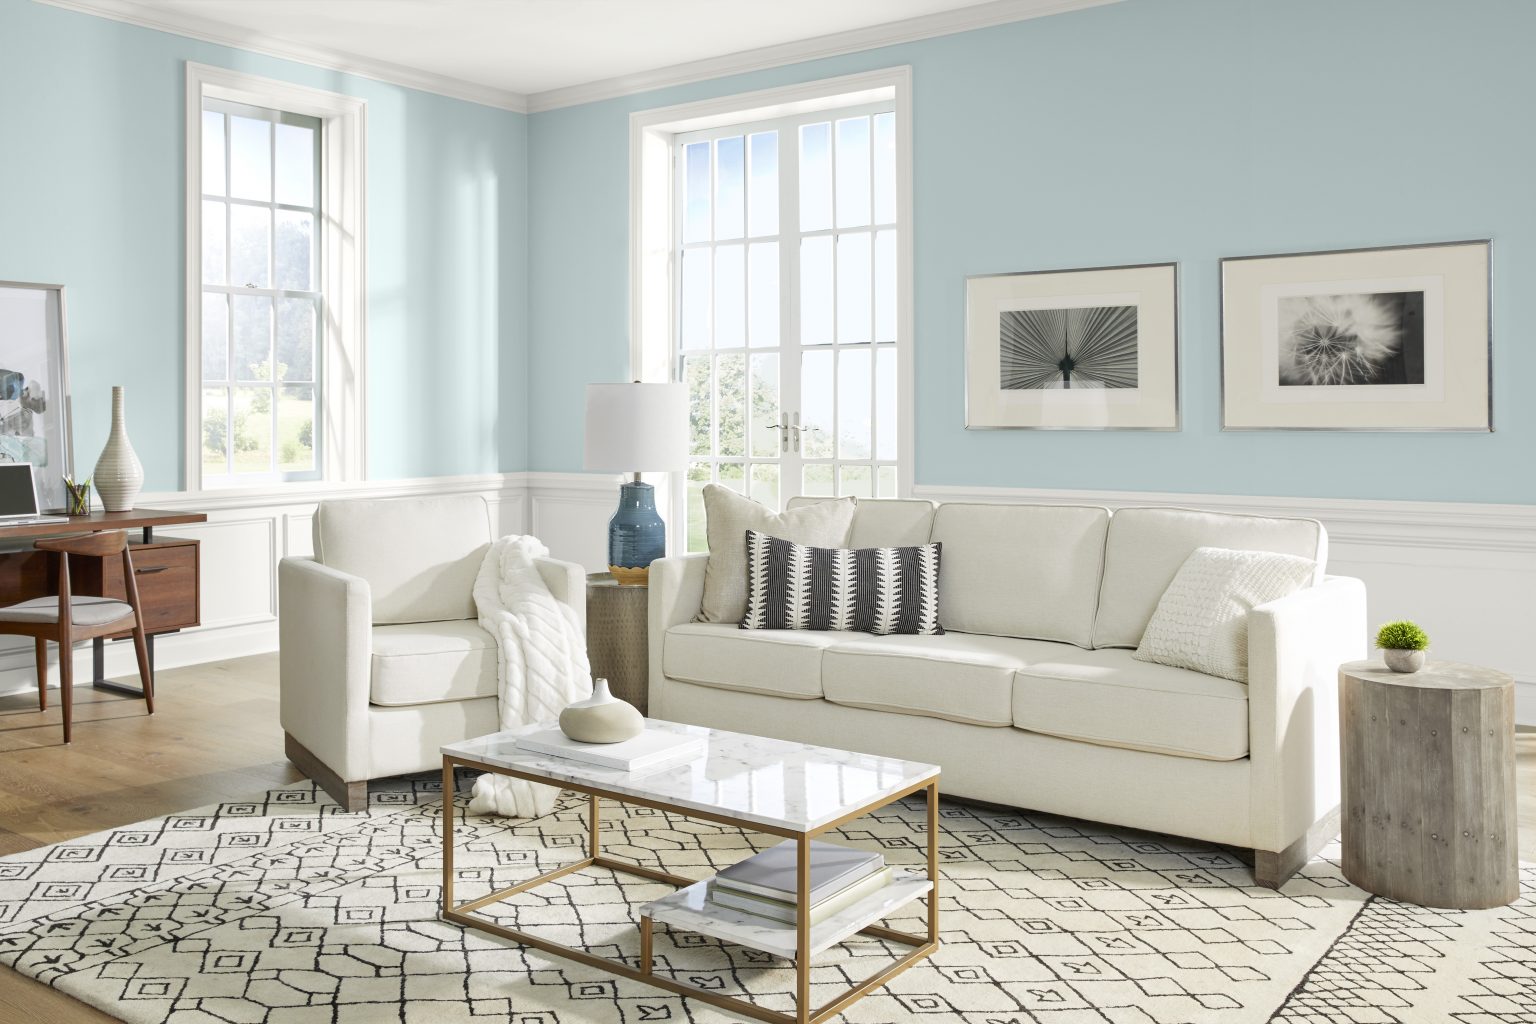 A bright coastal style living room with walls painted in light blue